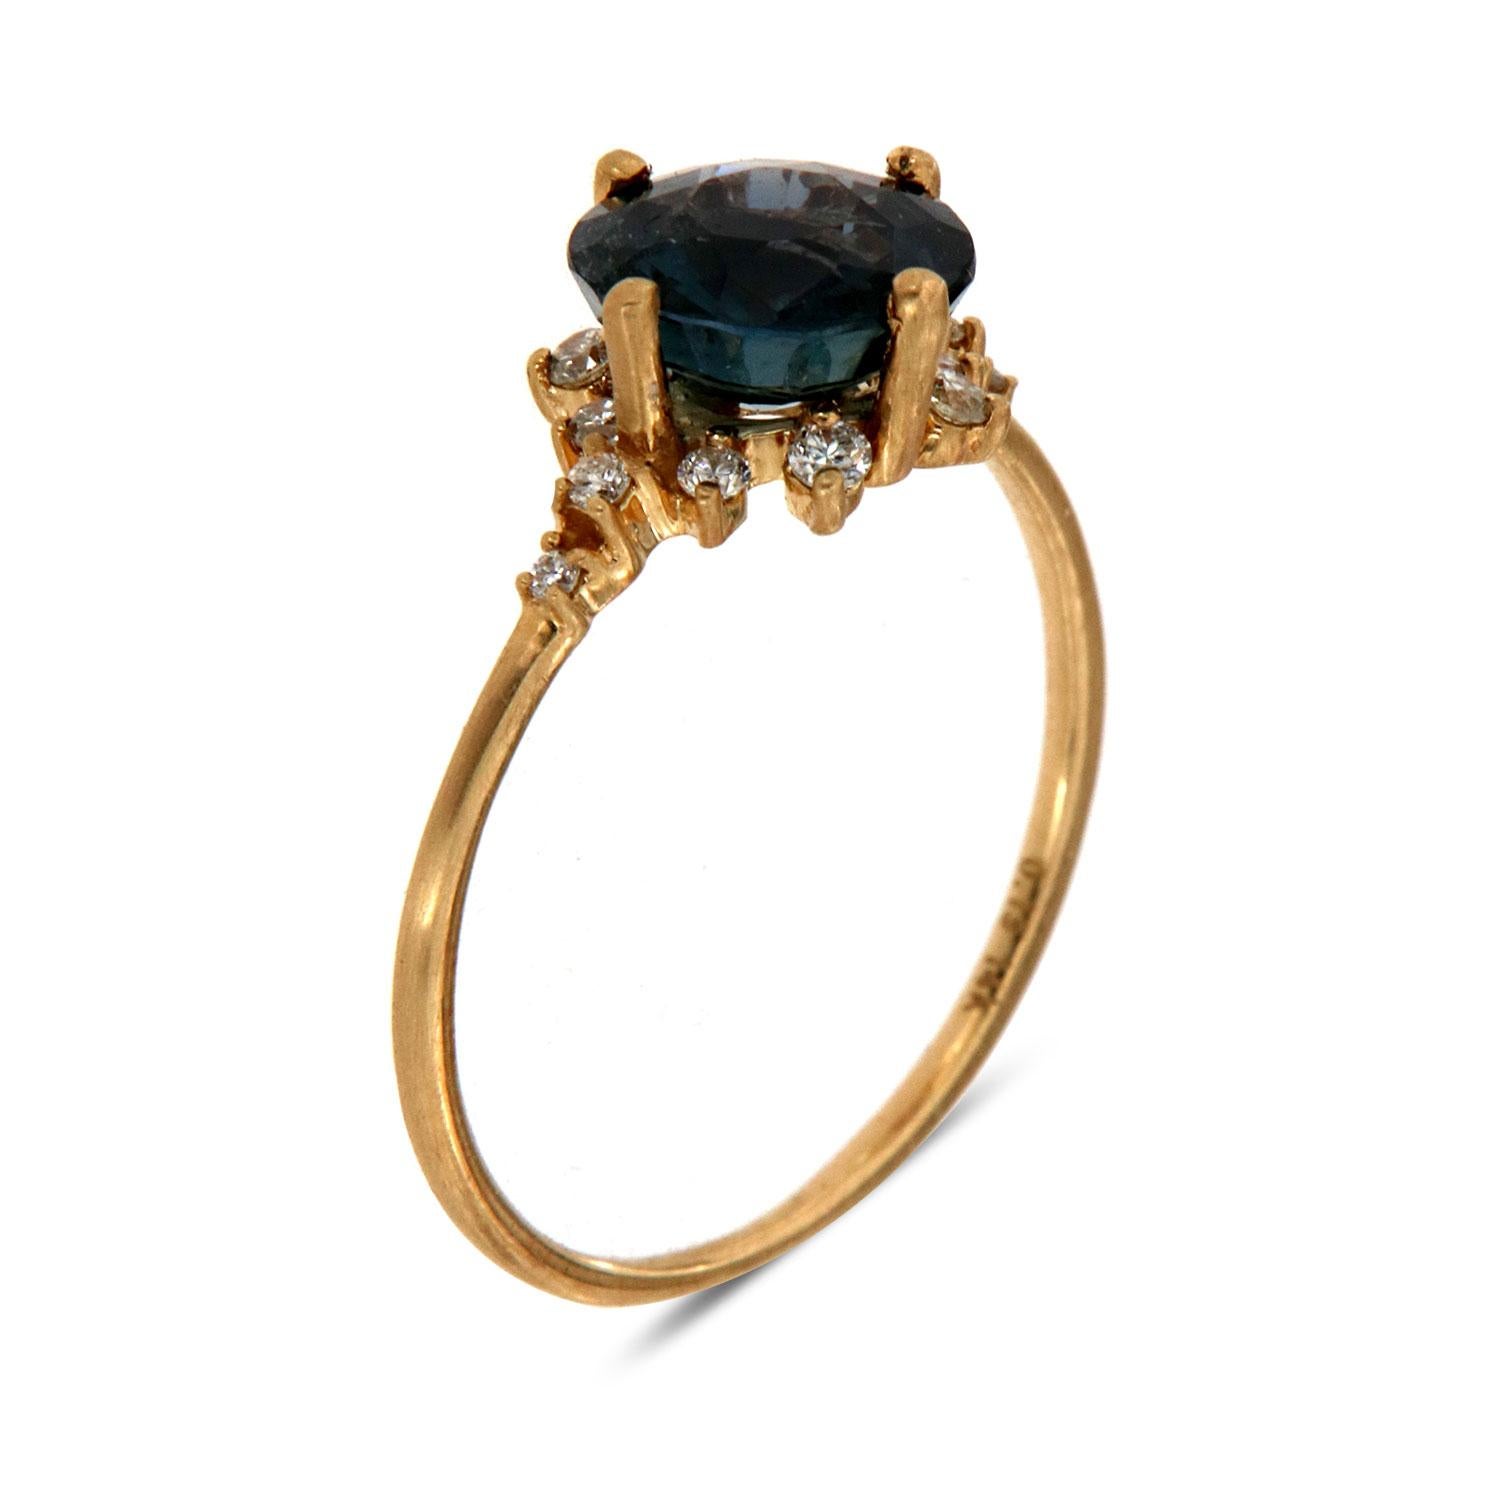 This petite organic style rustic ring is impressive in its vintage appeal, featuring a 1.90 Carat old cut natural unheated Teal color Round shape Sri-Lankan sapphire, accented with a halo of twelve scattered round brilliant diamonds in weight of